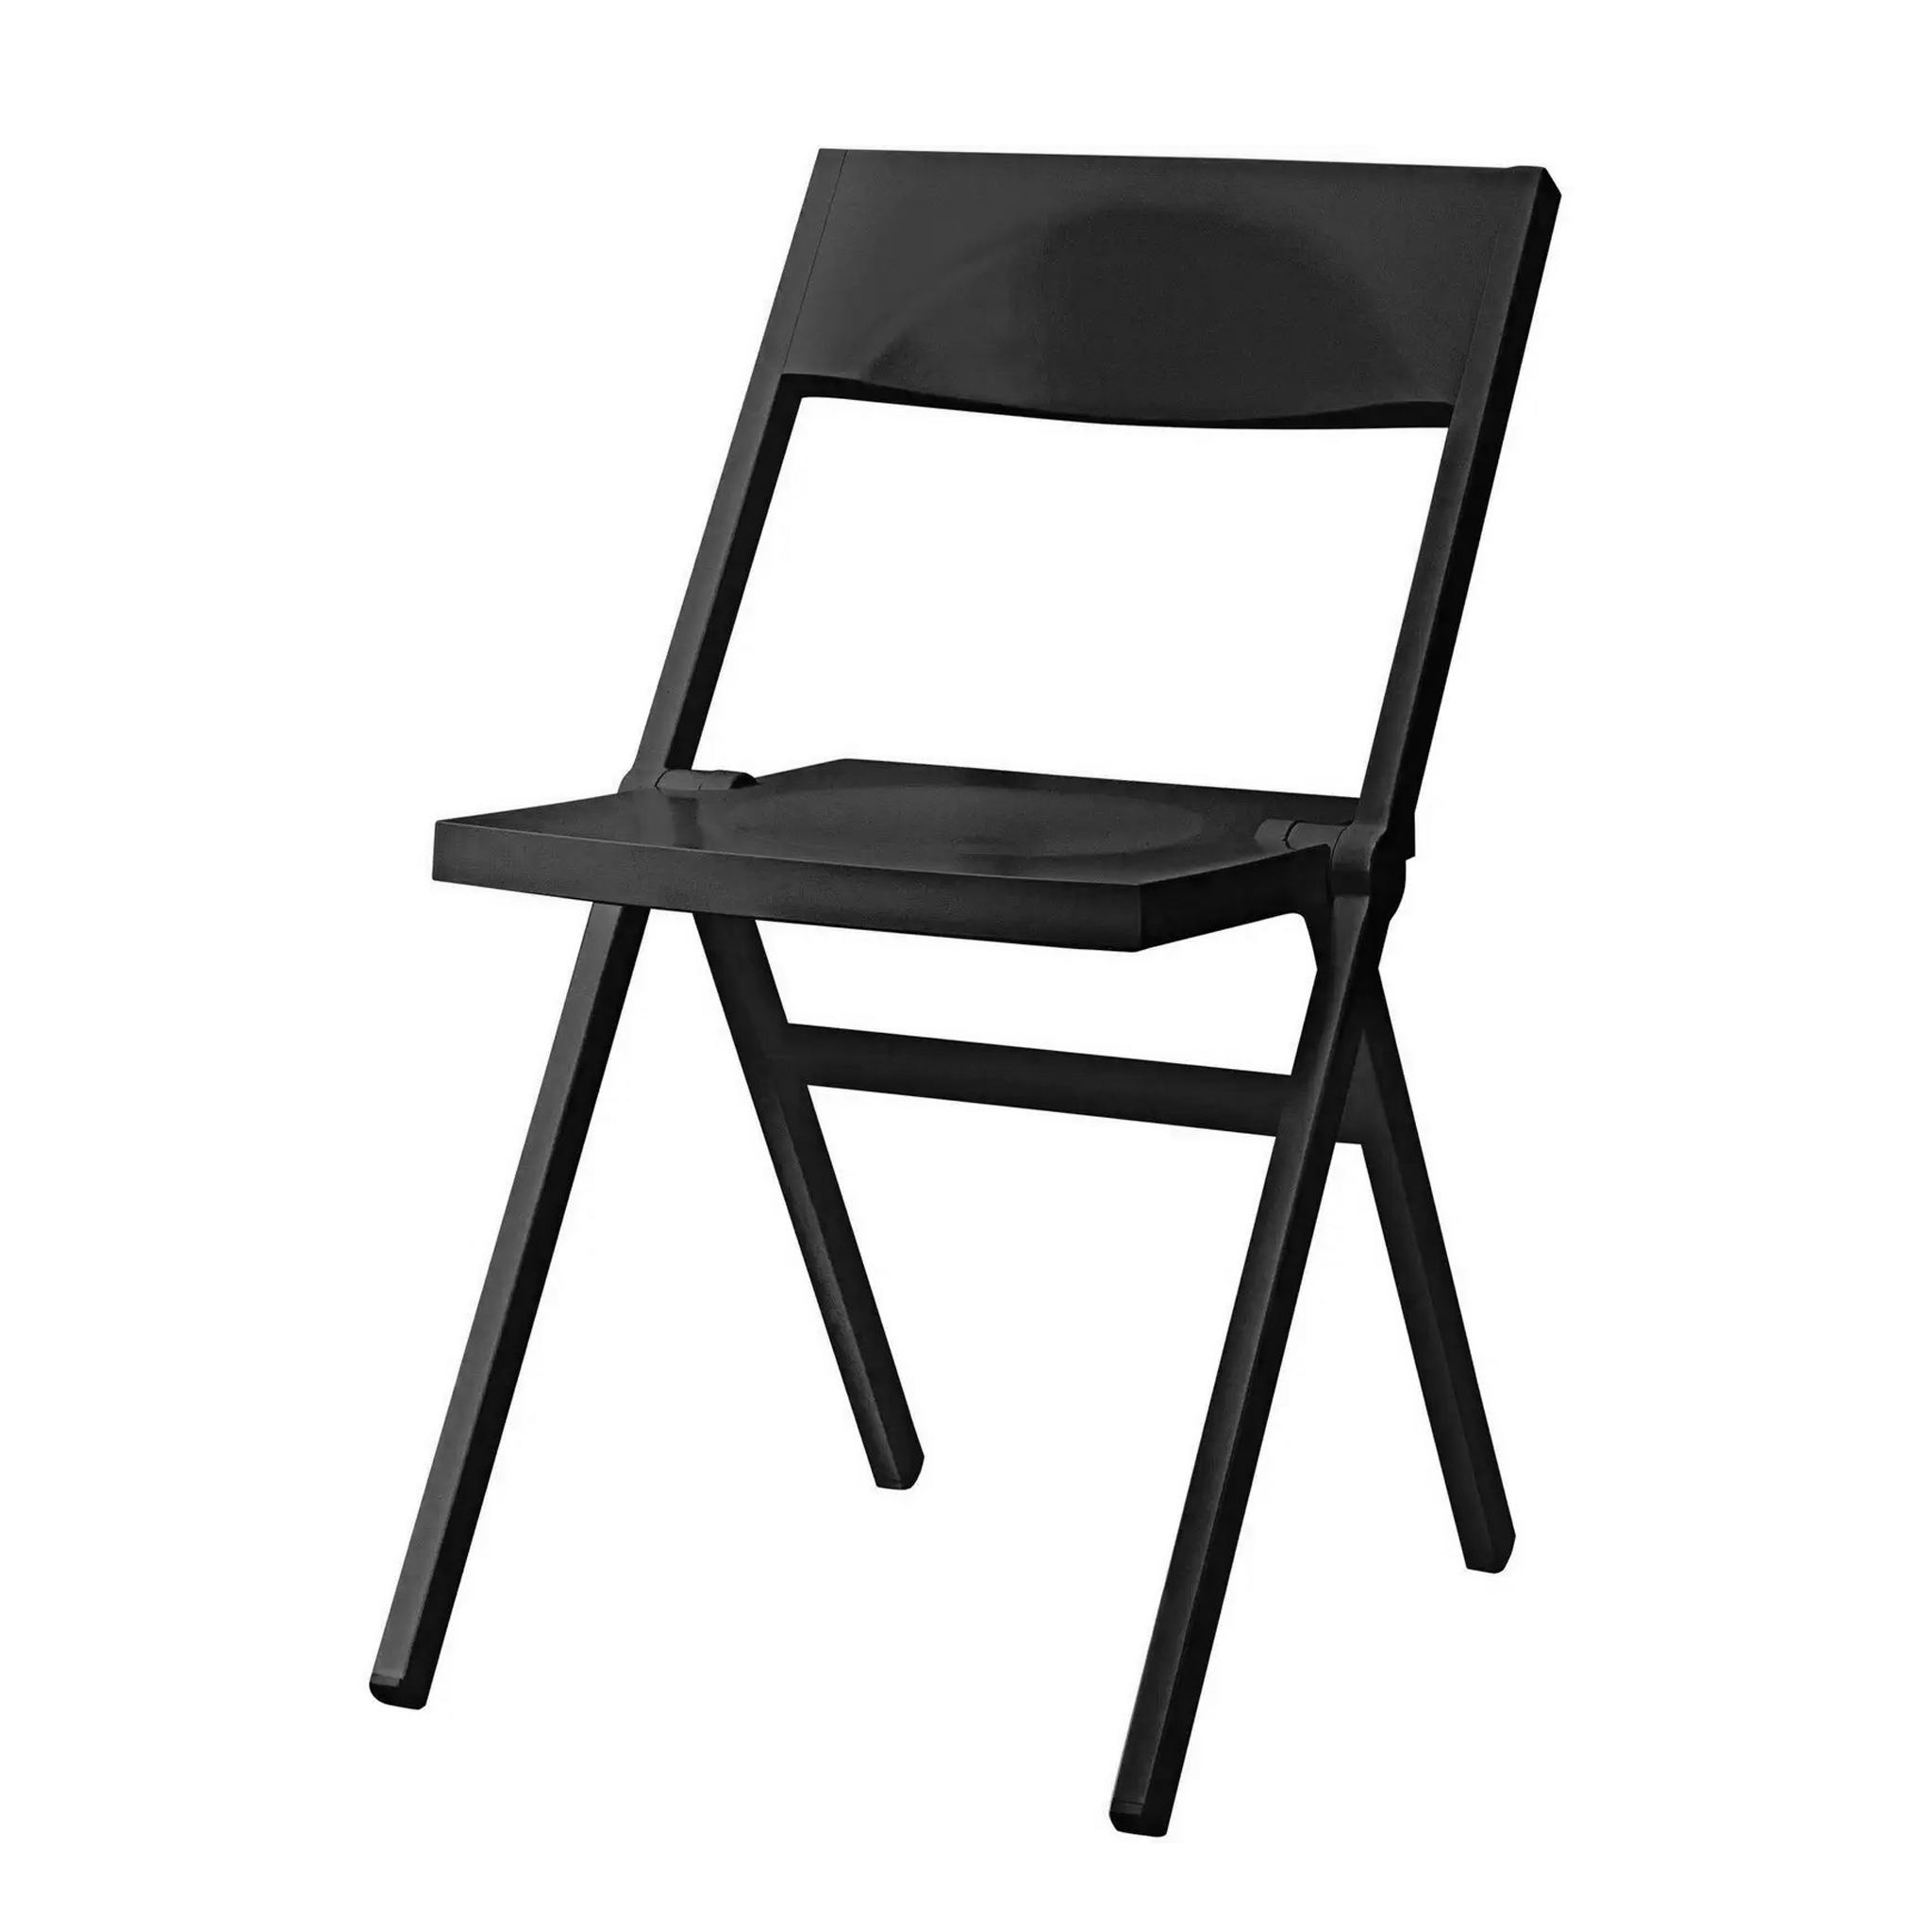 Piana Folding Chair by Alessi